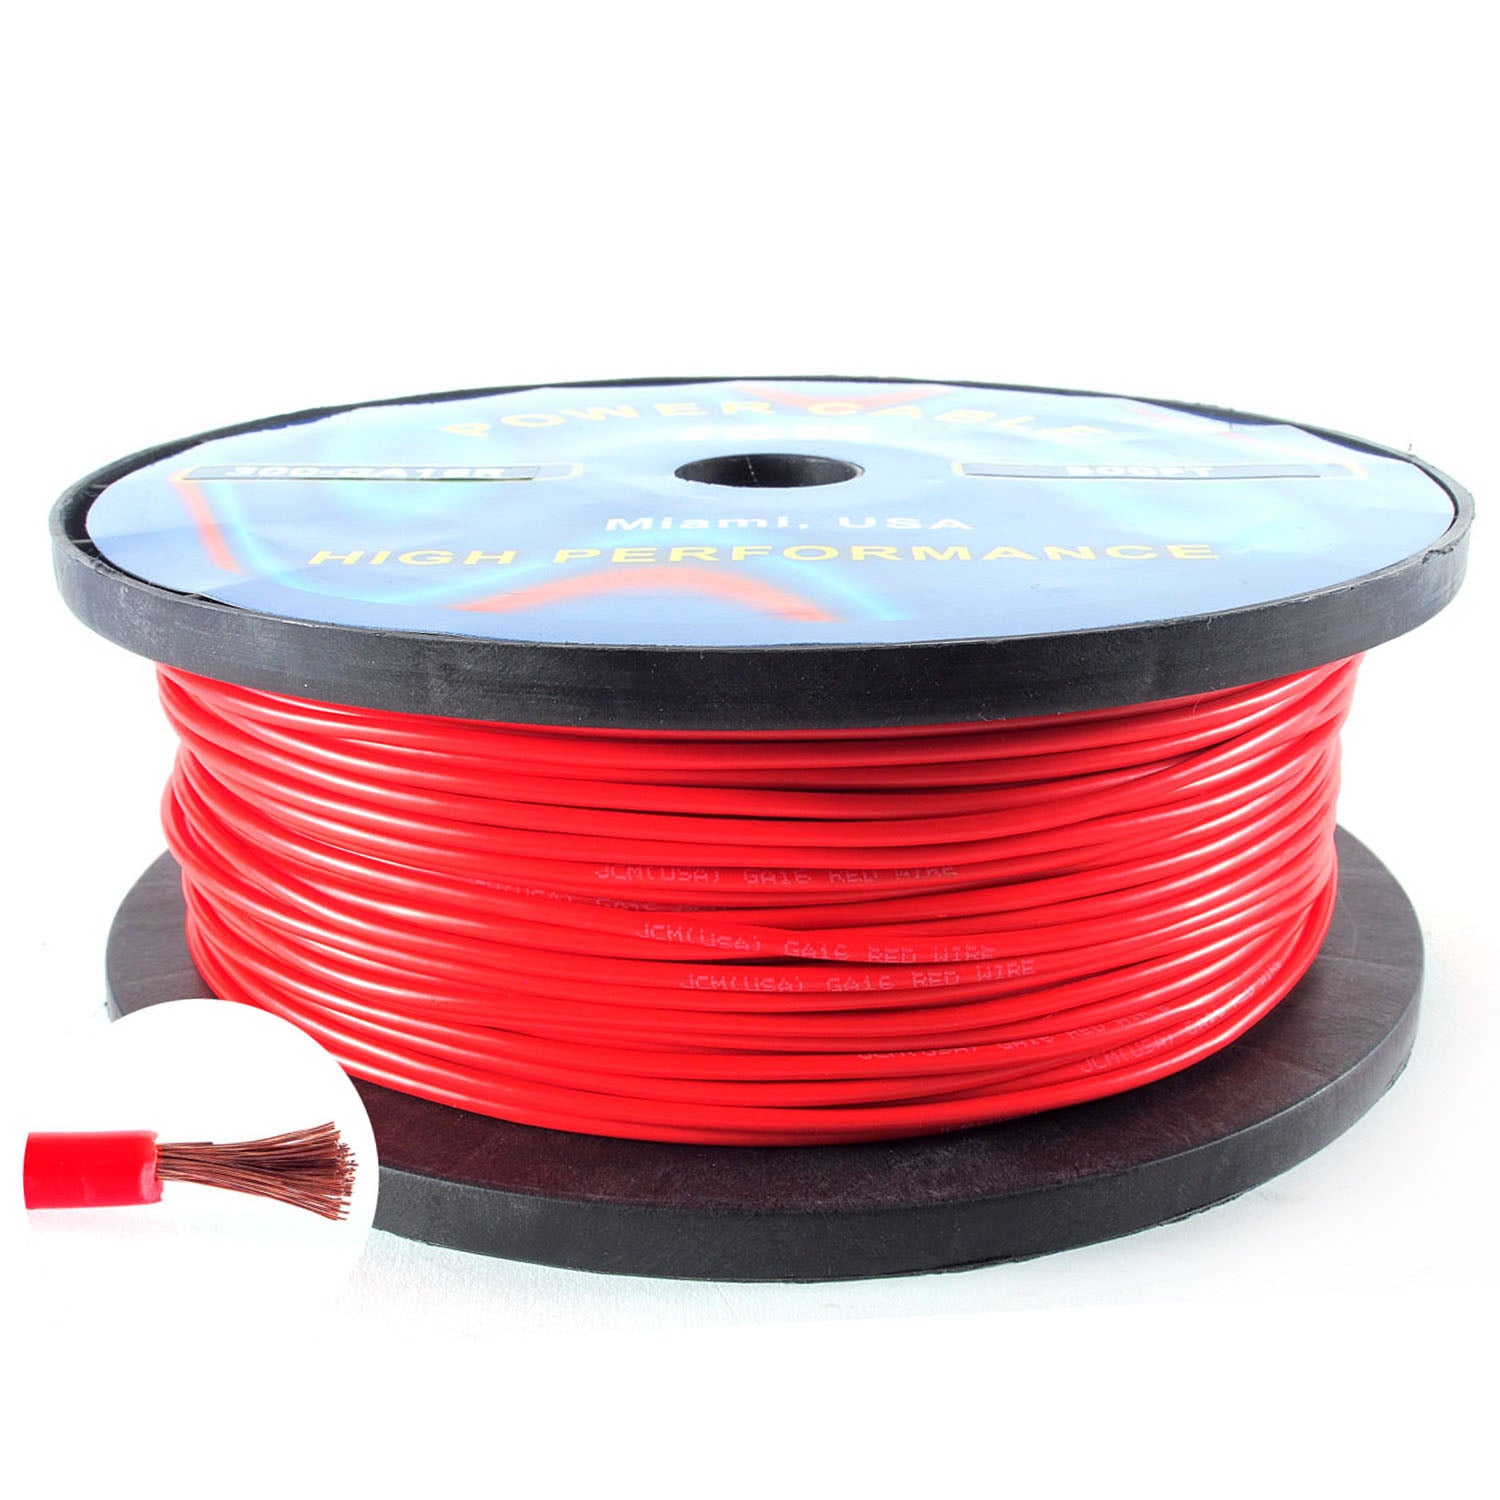 300-GA16/R500FT 500FT 16GA Red Wire